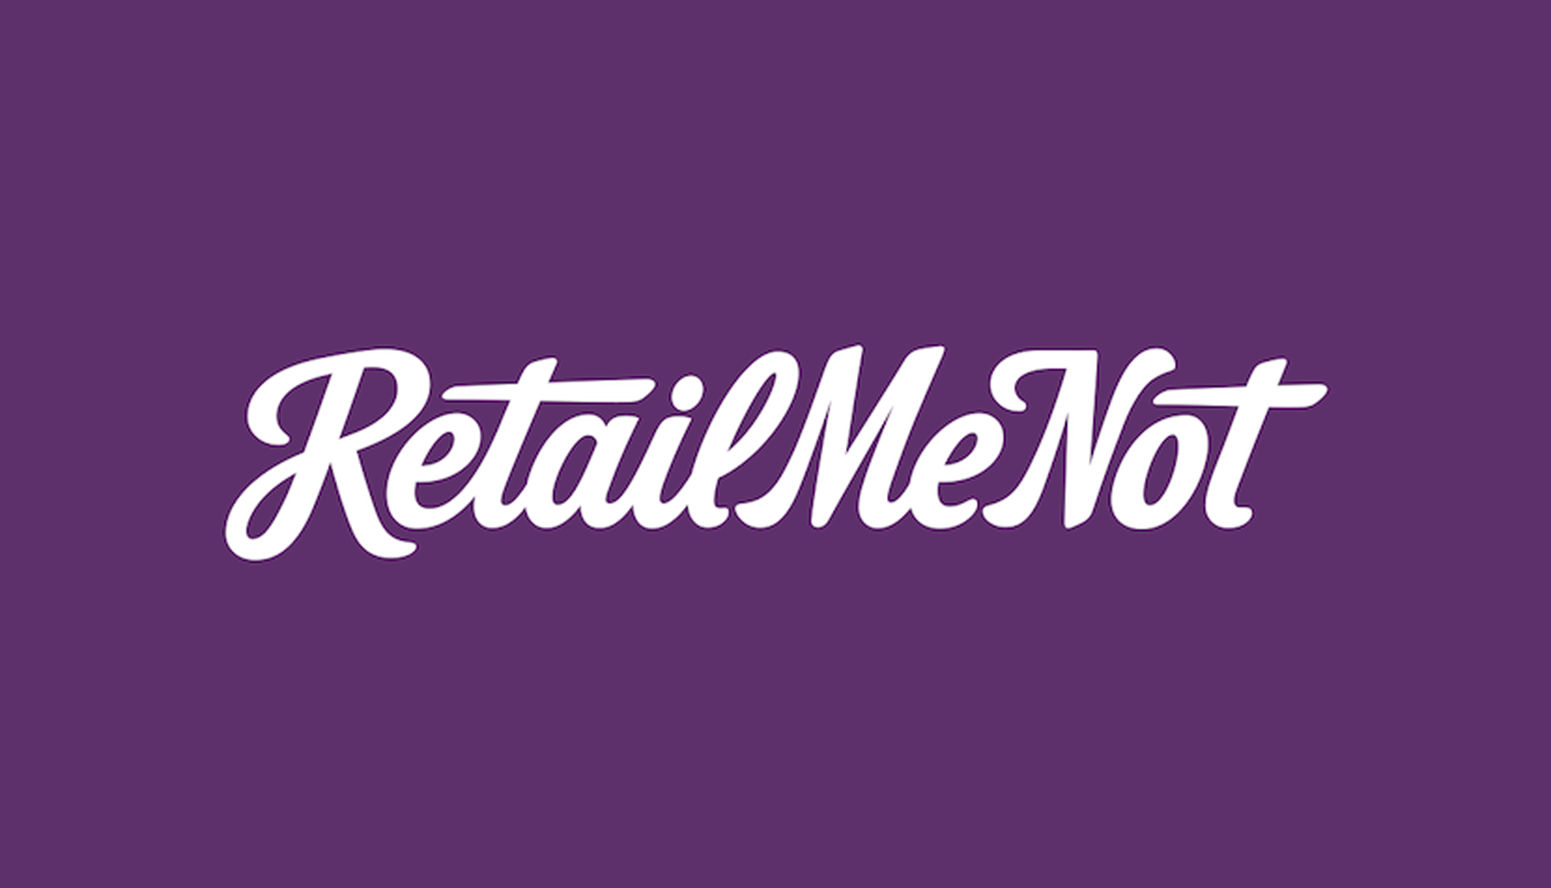 RetailMeNot Review – Save Money Shopping With Coupons & Cash Back